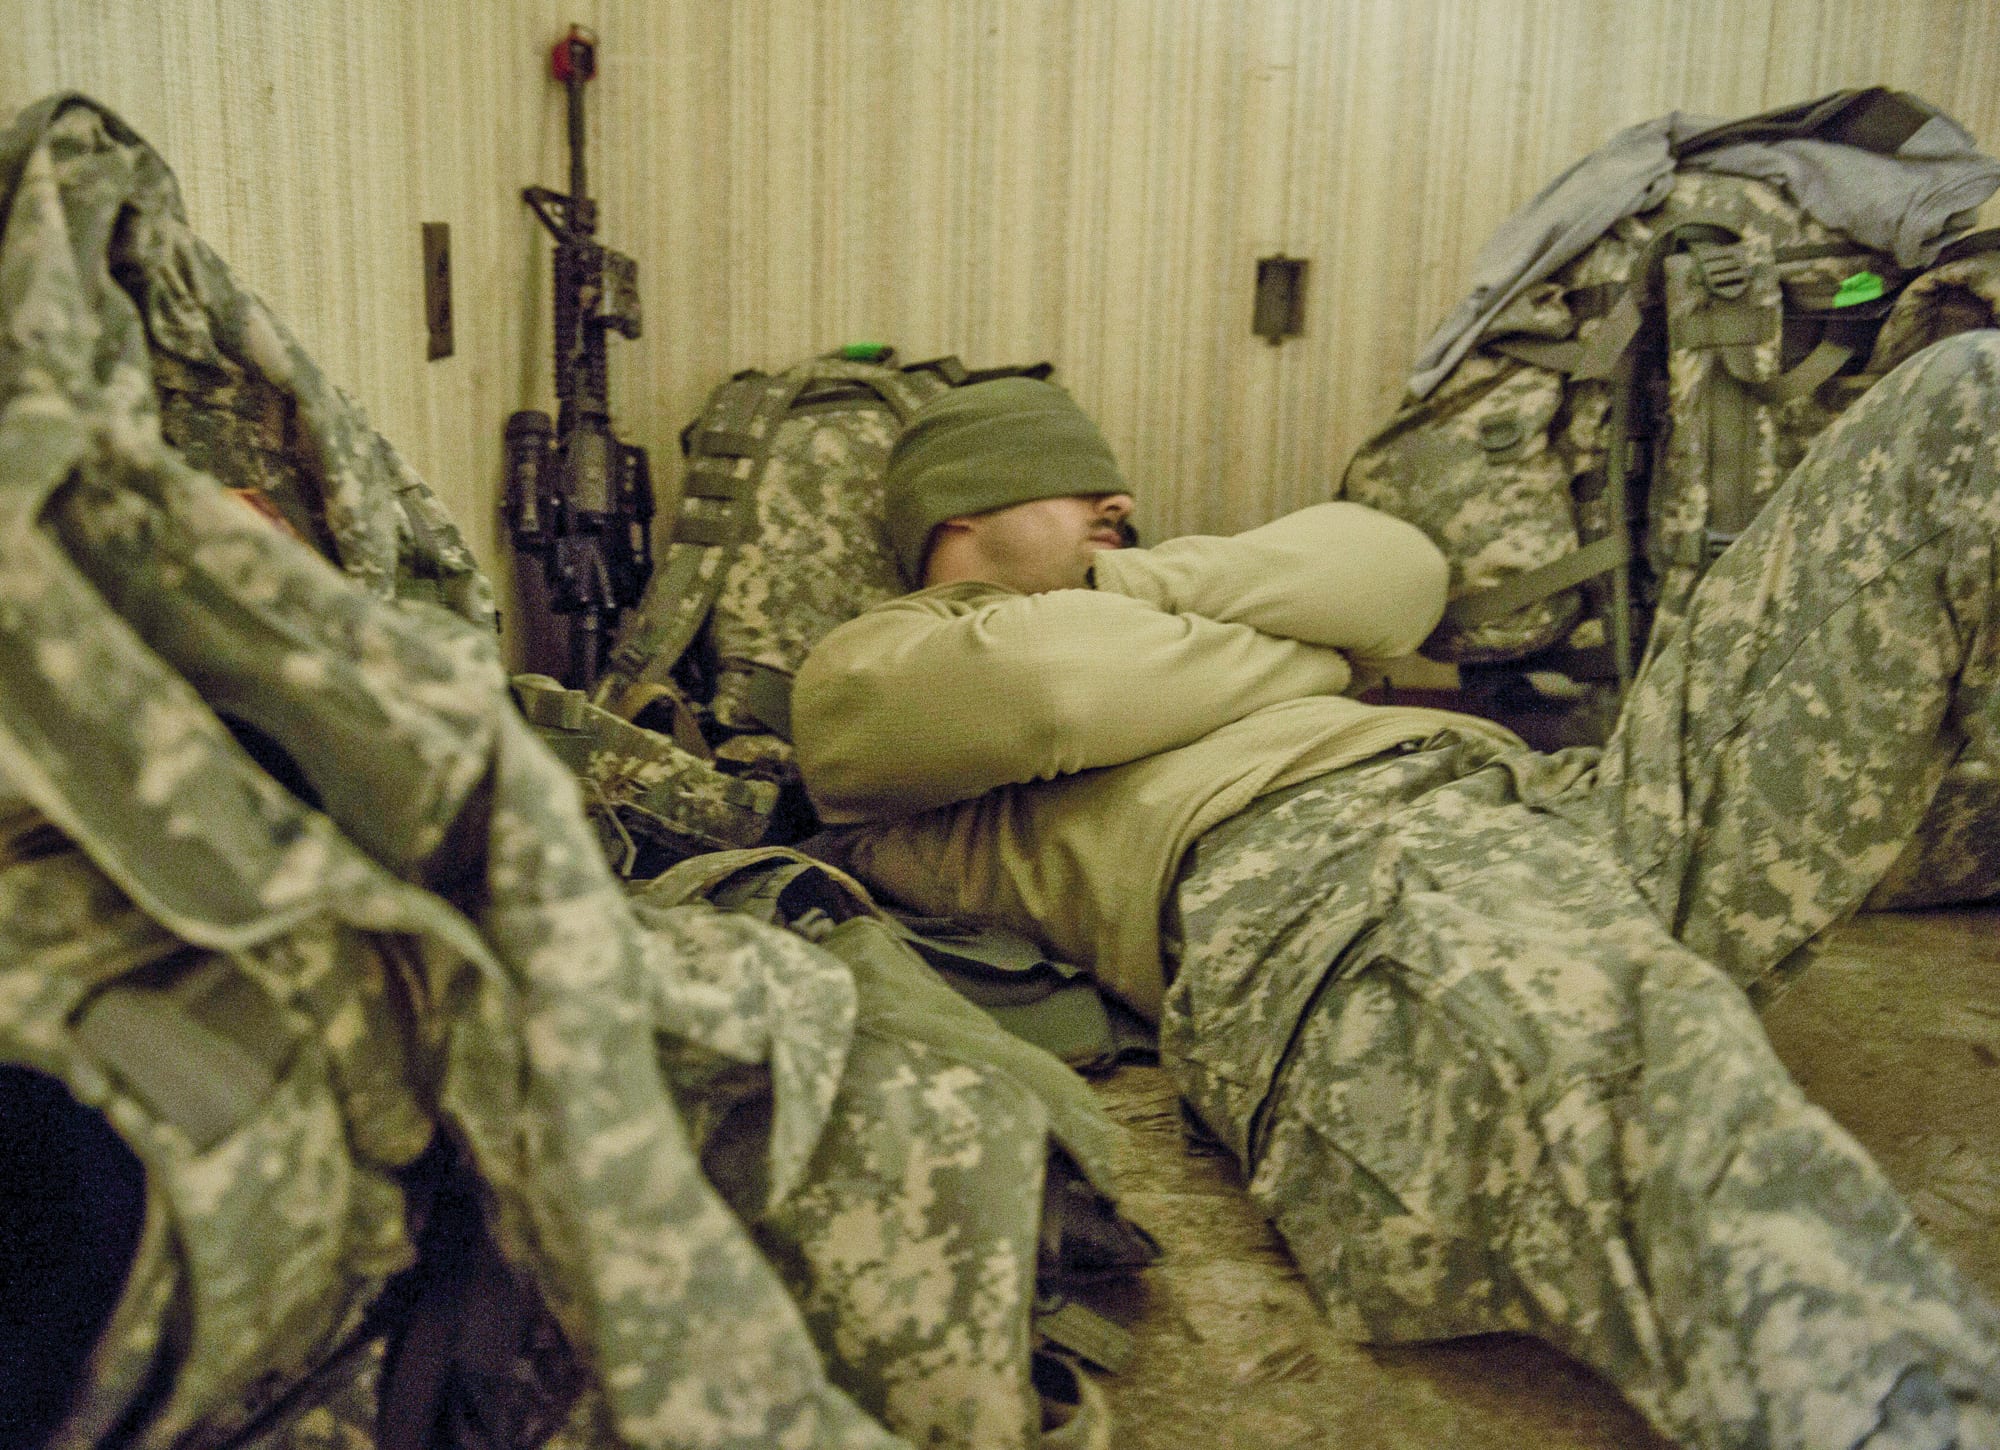 Sgt. Ryan Blount, 27th Brigade, New York Army National Guard, rests in a hallway after a full day of field training, before heading back out Jan. 16, 2015, at Alexandria International Airport, La. The exercise was an eight-day combined military training event designed to prepare Airmen and soldiers to respond to worldwide crises and contingencies. People can lessen the effects of sleep deprivation during long operations by taking precautions such as allowing Soldiers seven to nine hours of sleep regularly for five to seven days before the mission and allowing Soldiers to sleep who are not mission essential at the moment, according to Col. Vincent Mysliwiec, a sleep medicine specialist with 121st Combat Support Hospital, Brian Allgood Army Community Hospital in Yongsan, South Korea. (U.S. Air Force photo by Senior Airman Cliffton Dolezal)